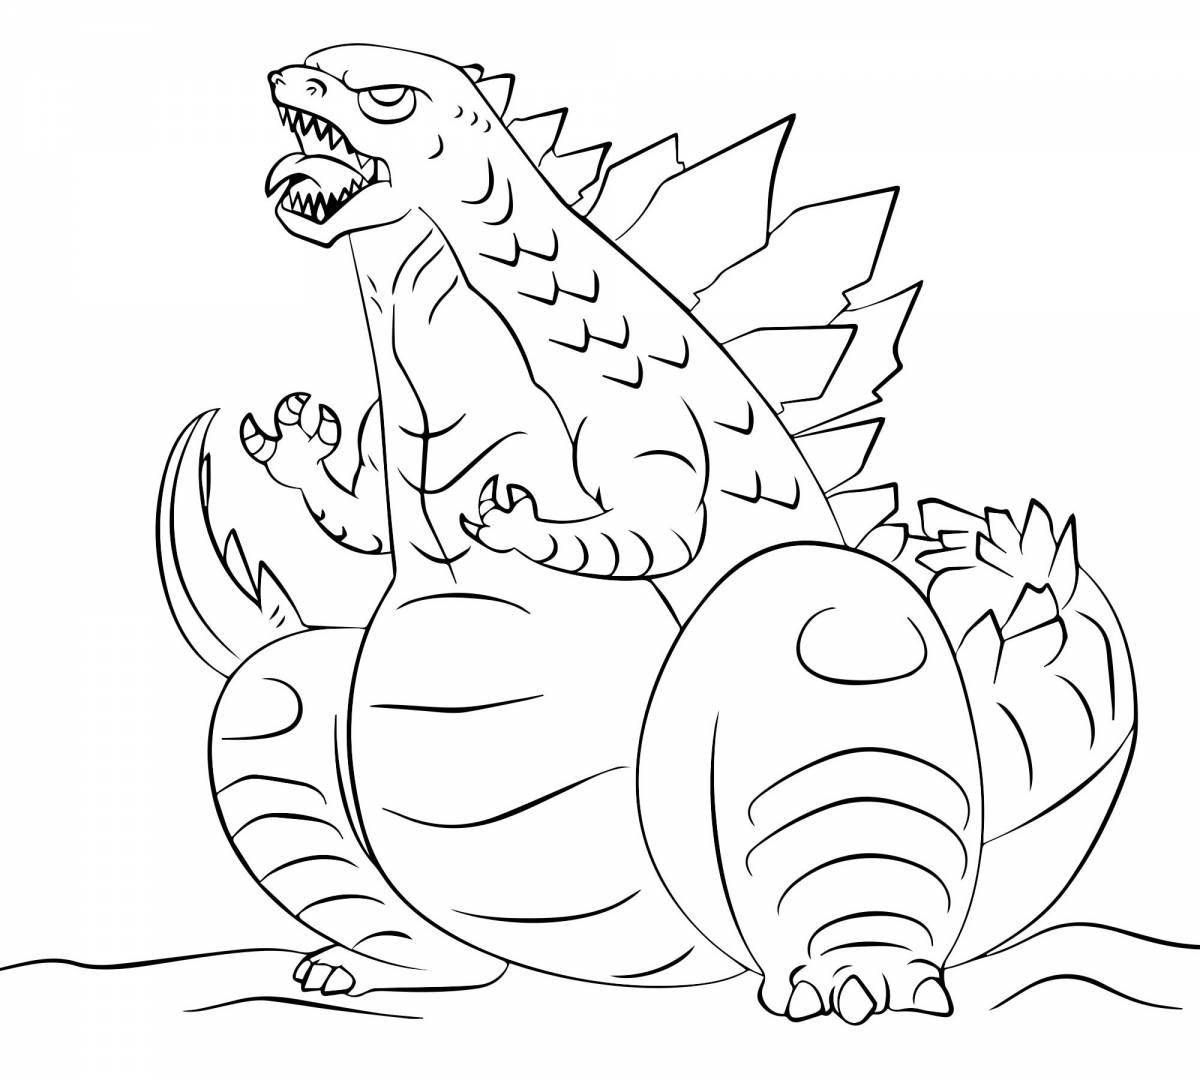 Gorgeous godzilla coloring book for boys